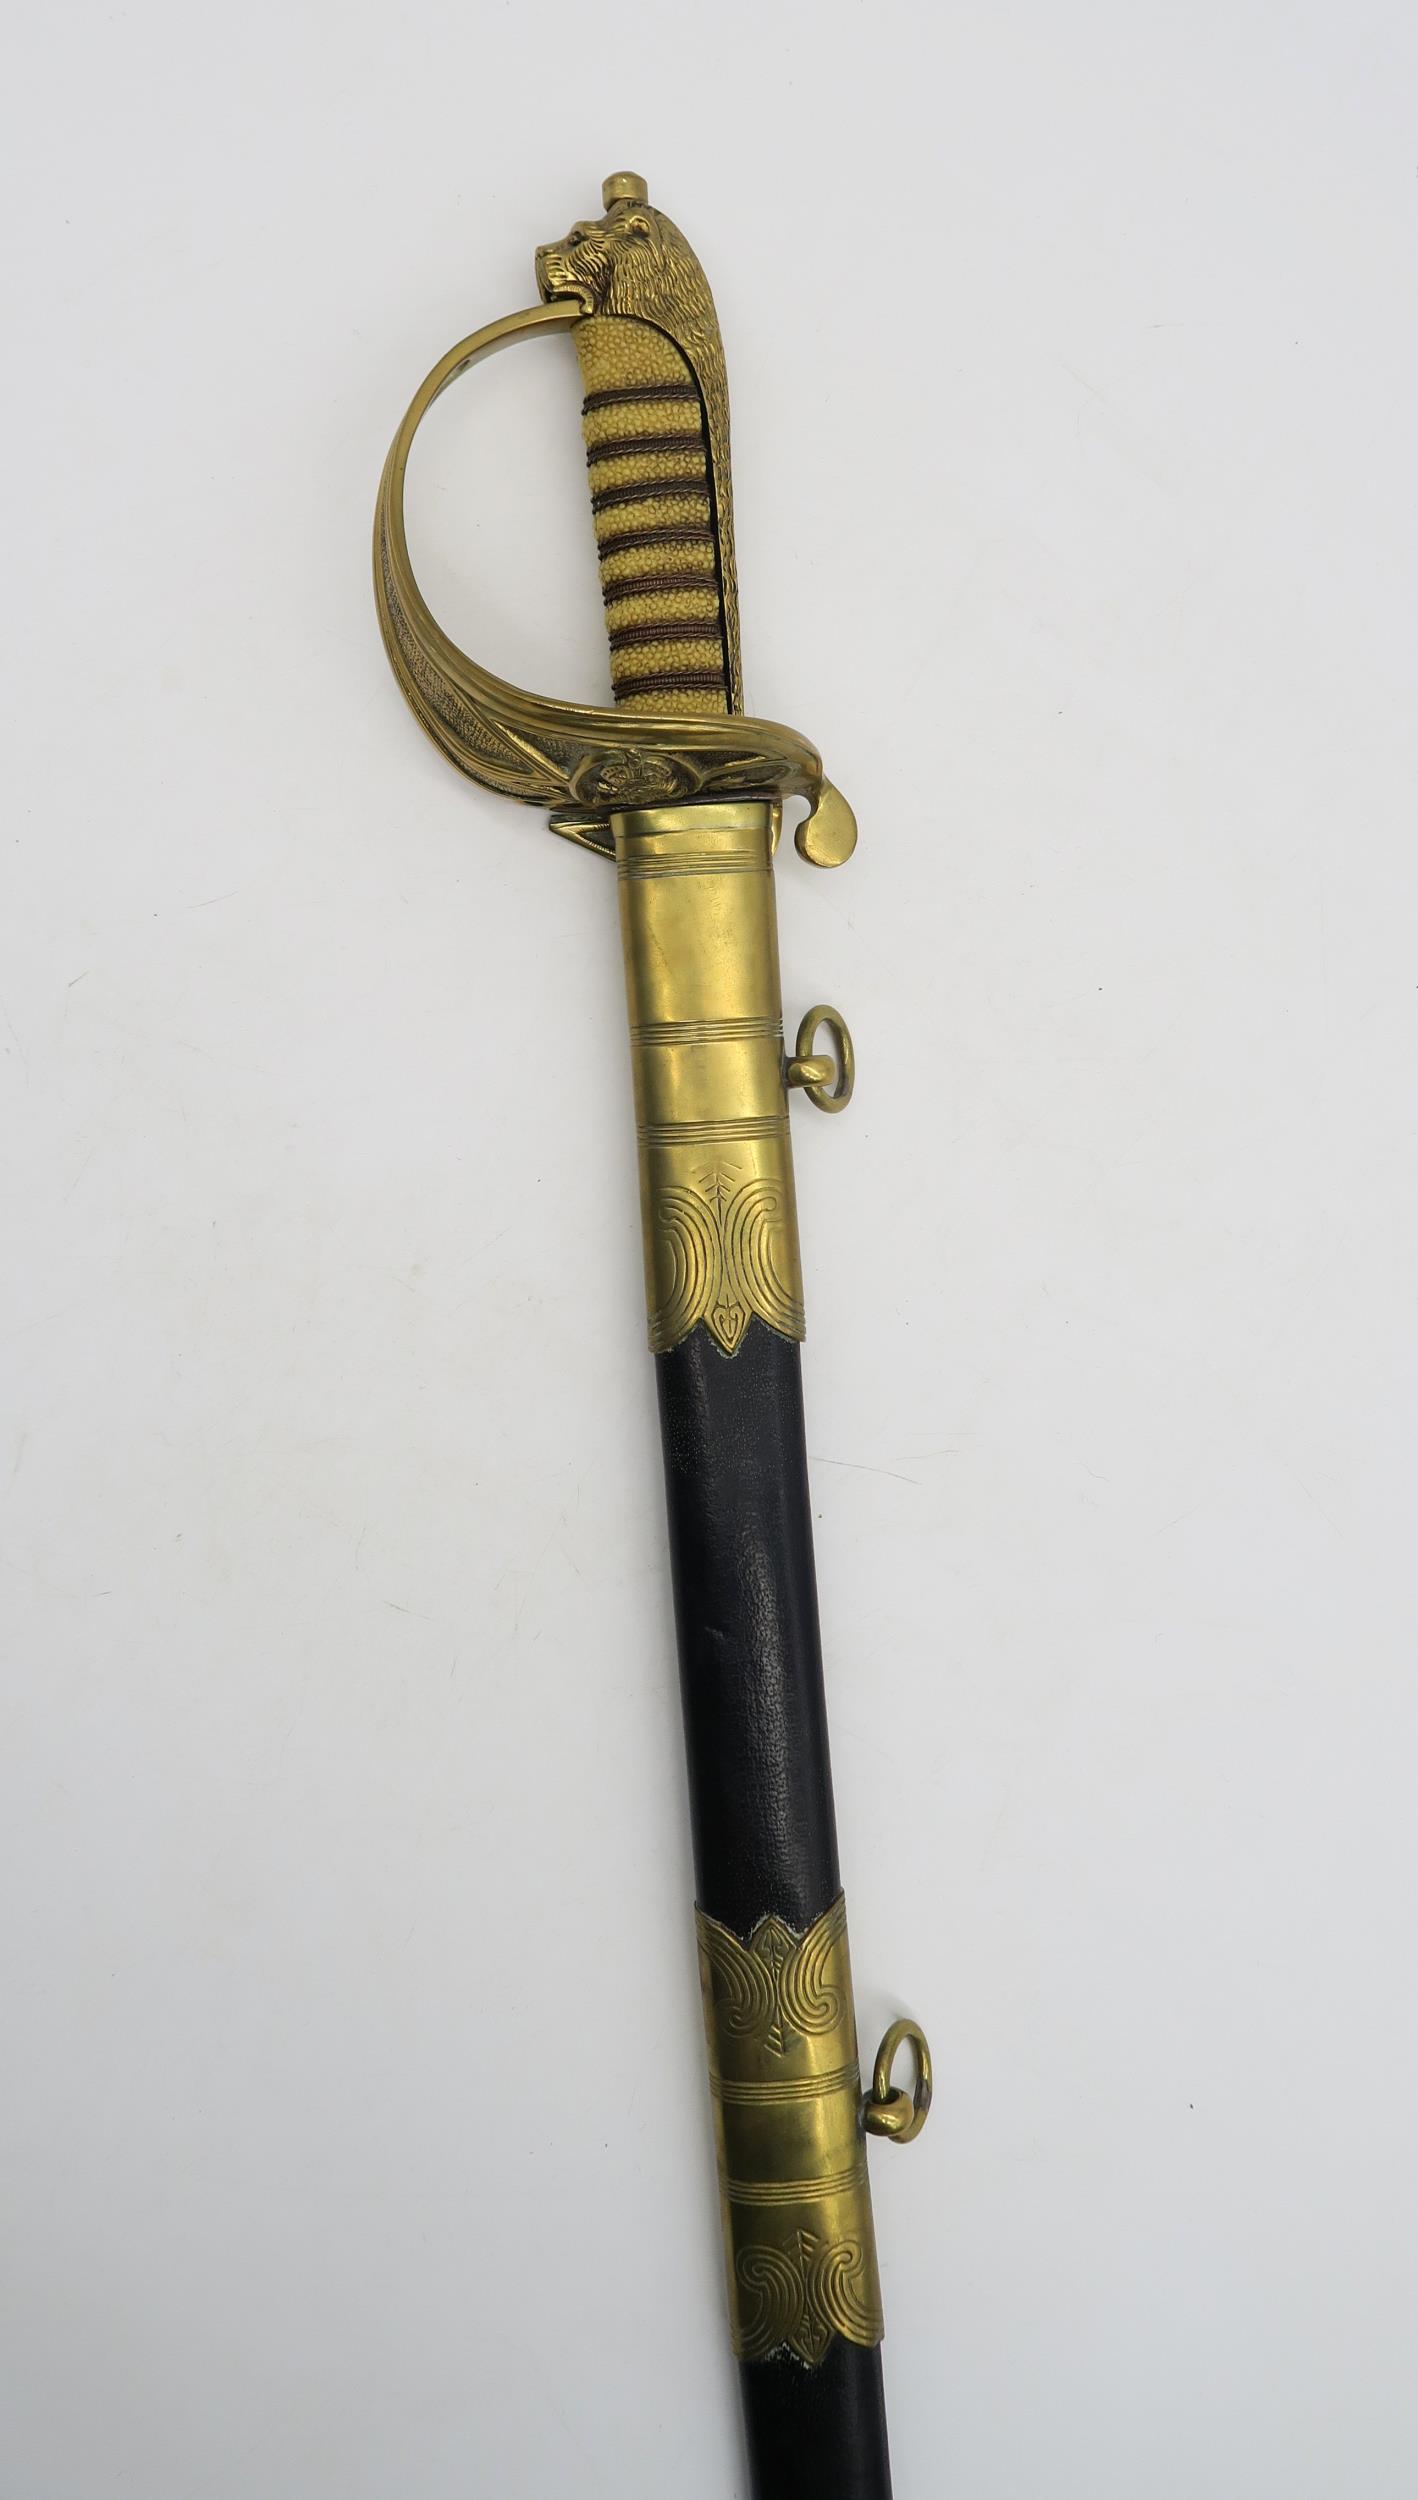 A reproduction Royal Navy officer's 1827 pattern dress sword, the blade measuring approx. 79.5cm - Image 2 of 3